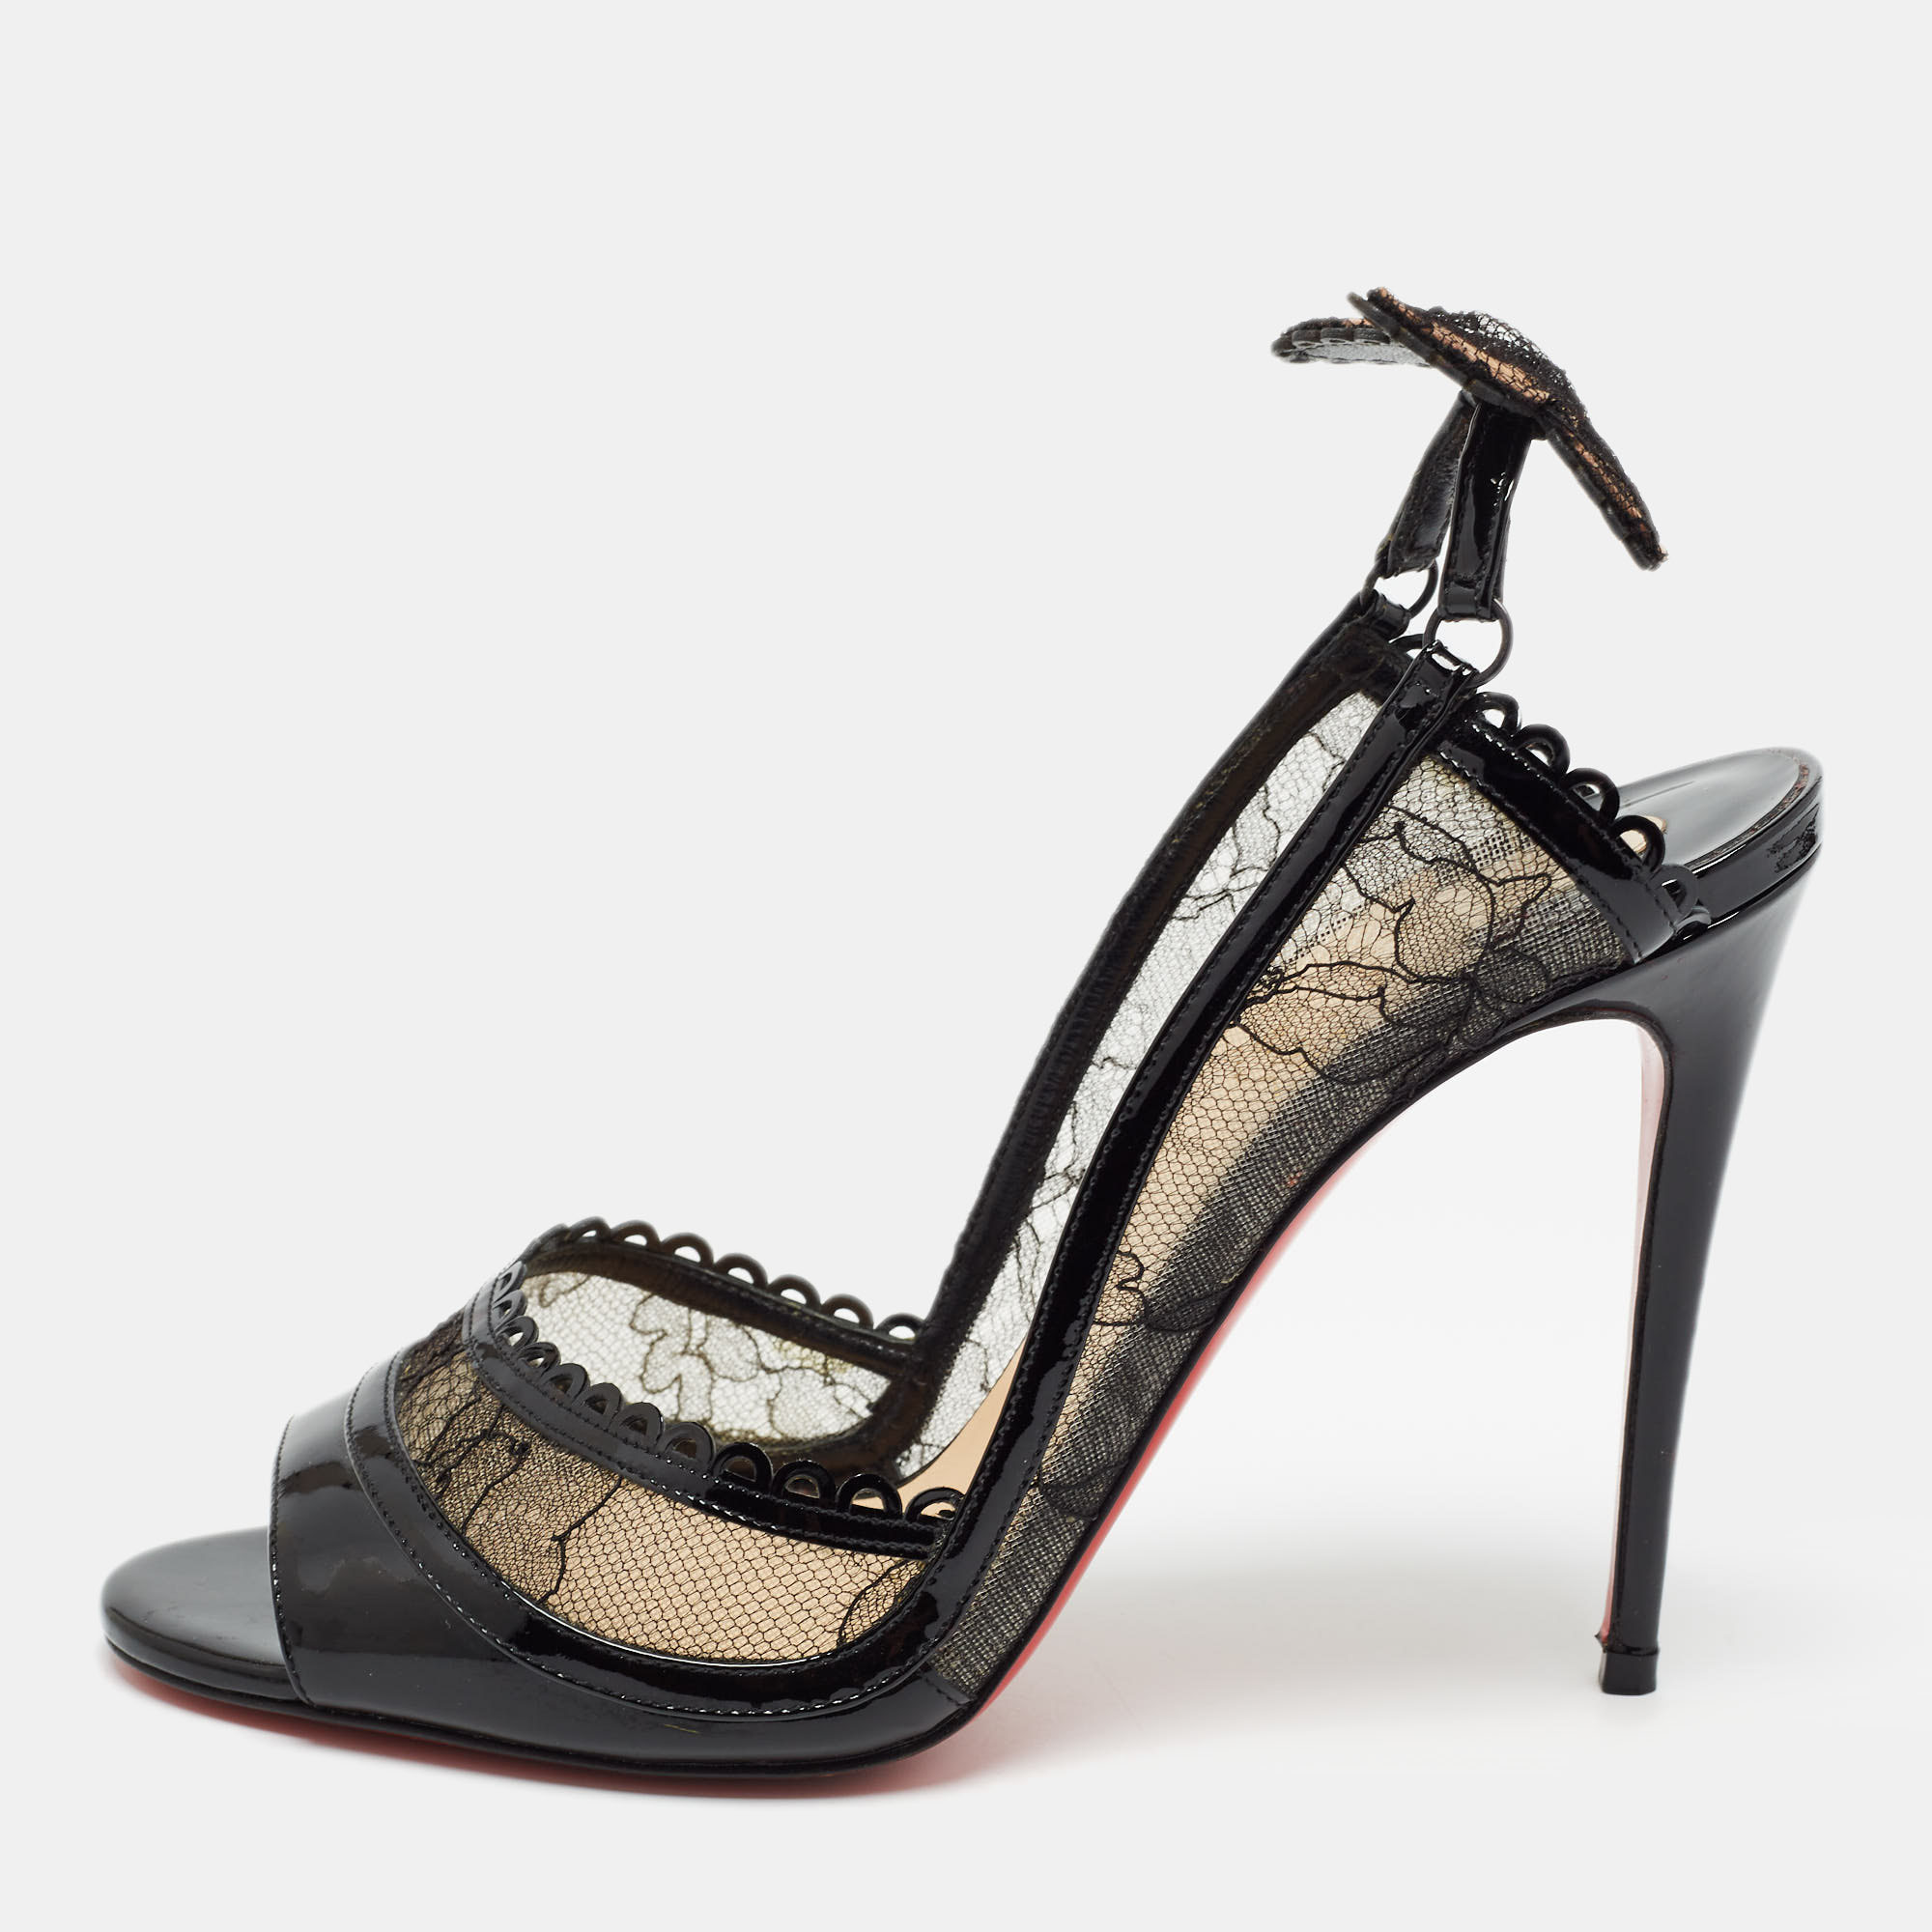 Christian Louboutin Black Lace and Patent Leather Hot Spring Butterfly Pumps Size 37.5